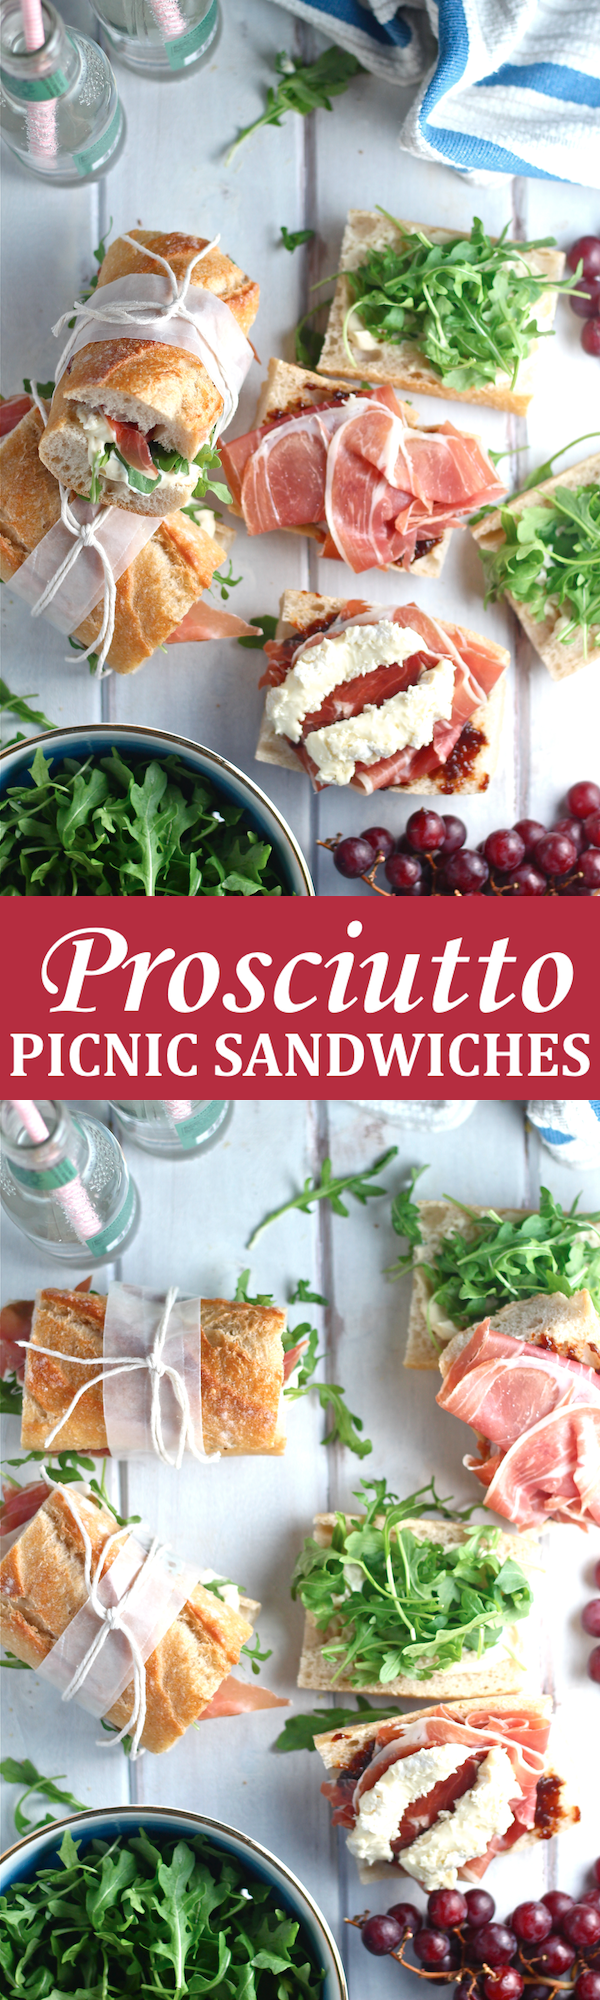 These Prosciutto Picnic Sandwiches are an easy and delicious European-style lunch! | The Millennial Cook #sandwich #prosciutto #brie #fig #arugula